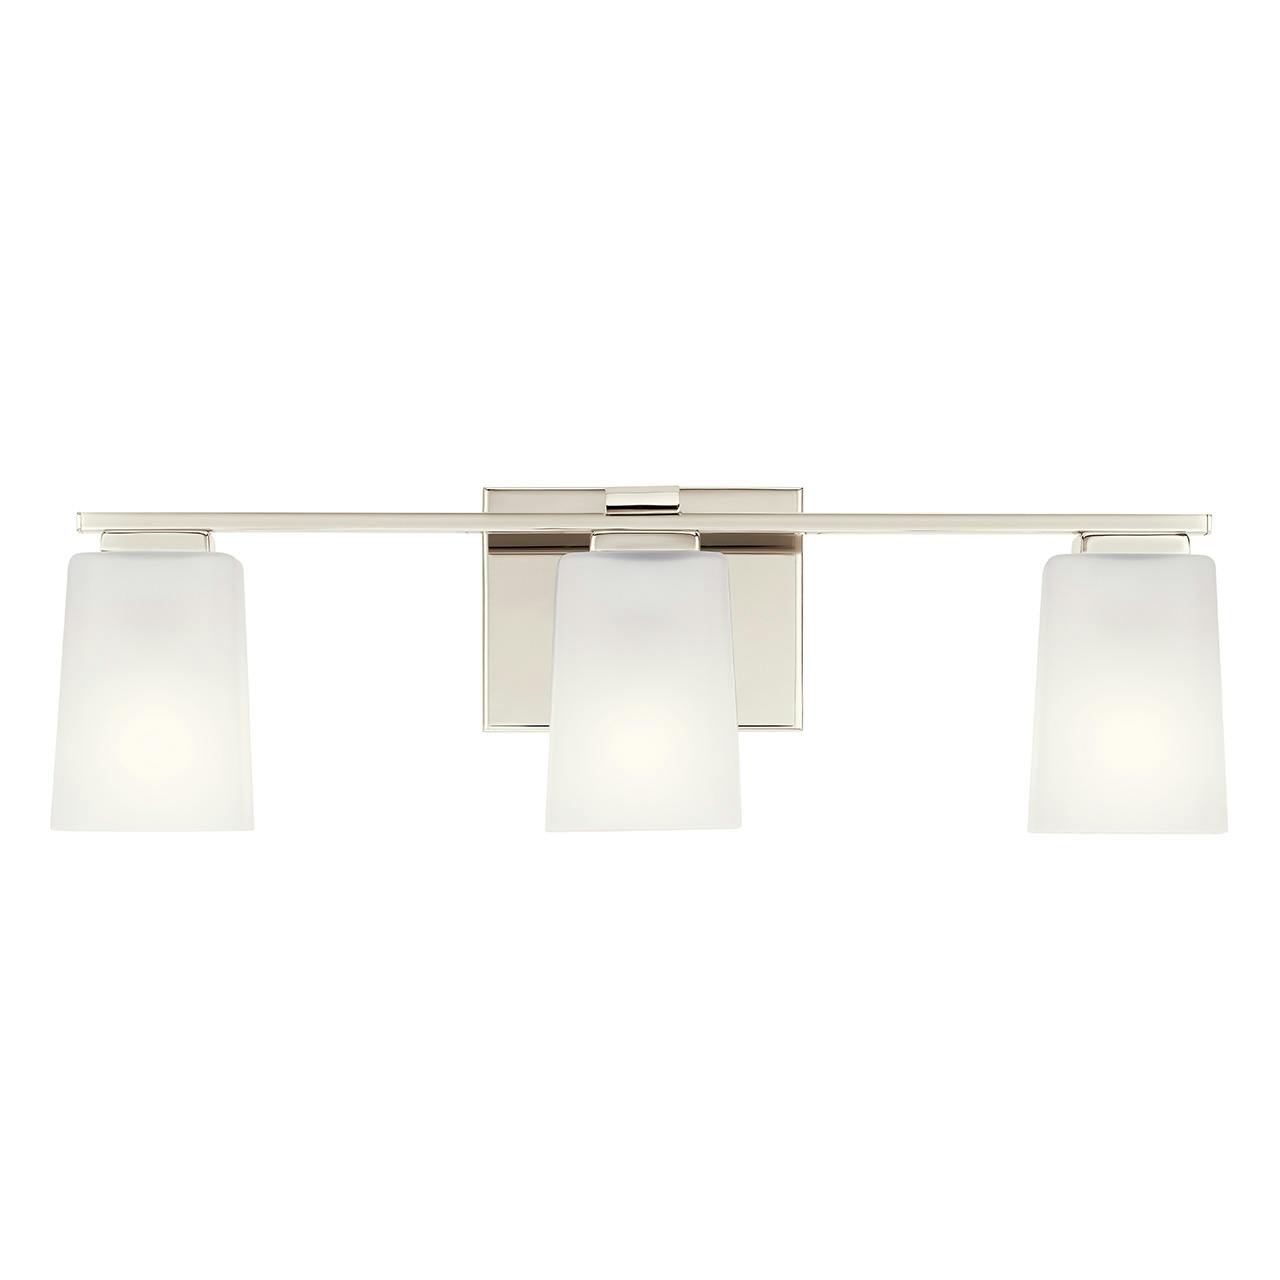 The Roehm 3 Light Vanity Light Nickel facing down on a white background